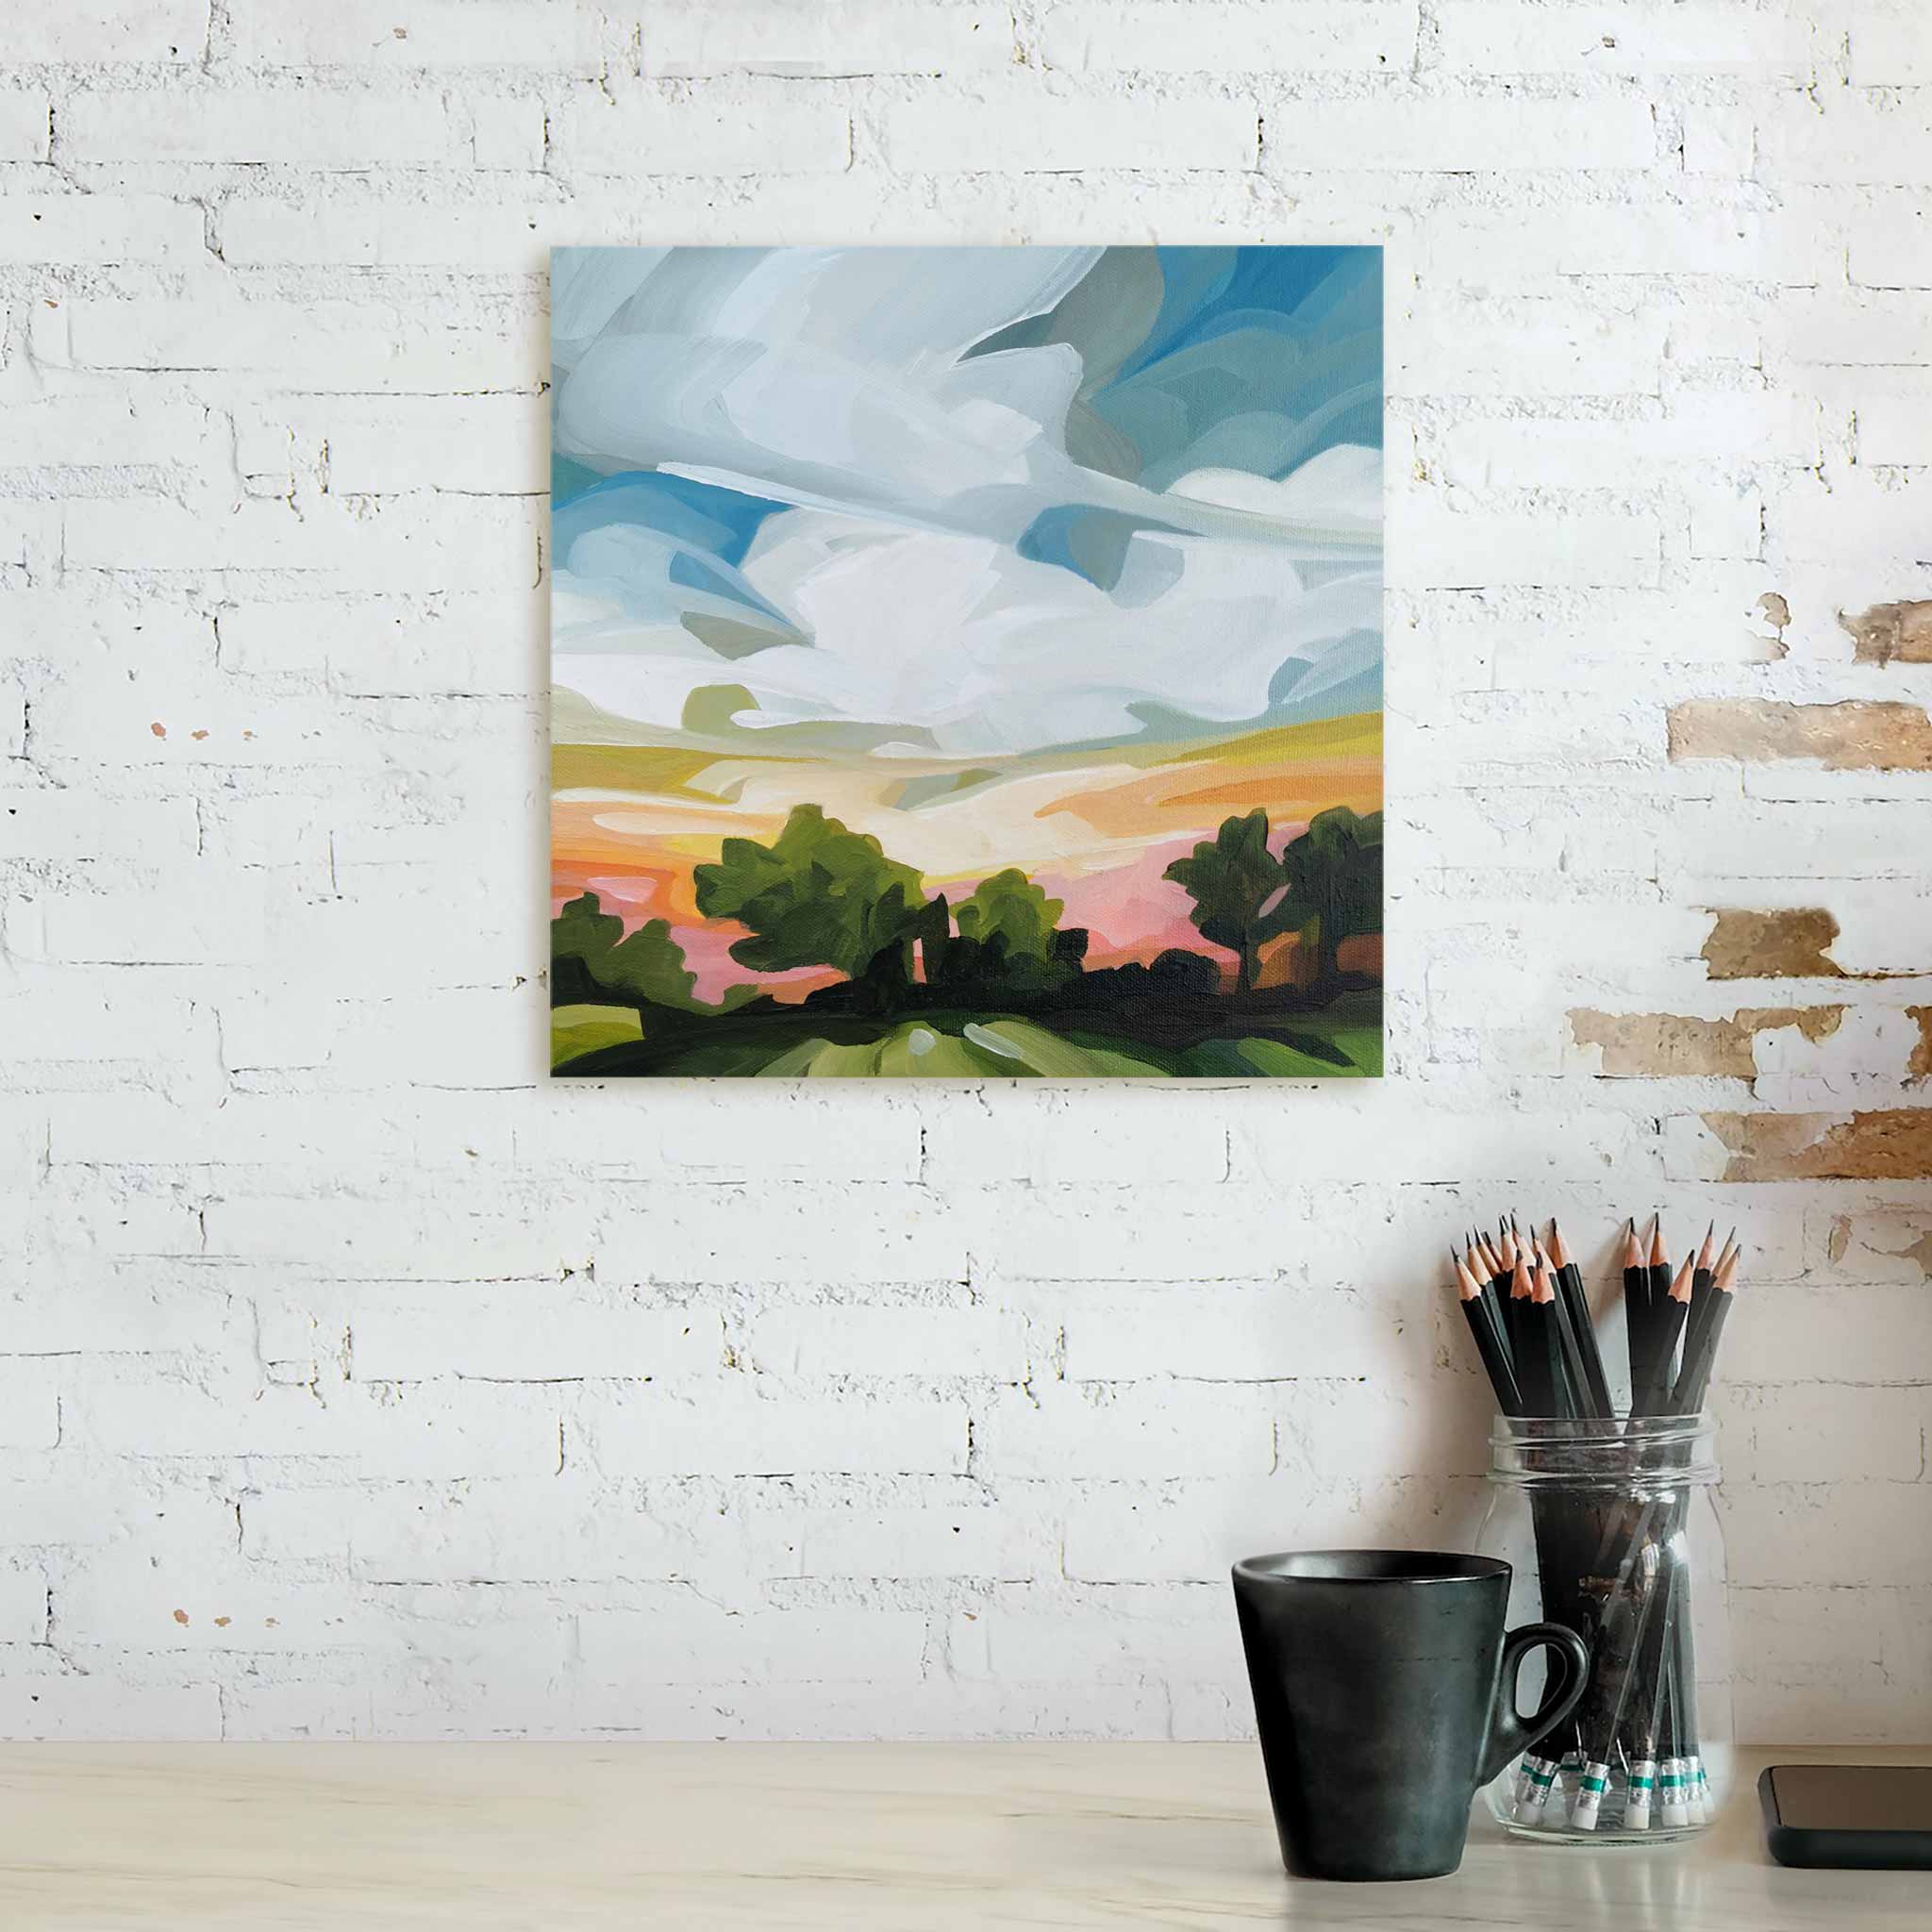 stunning landscape acrylic paintings with setting sun over a treeline painting on canvas